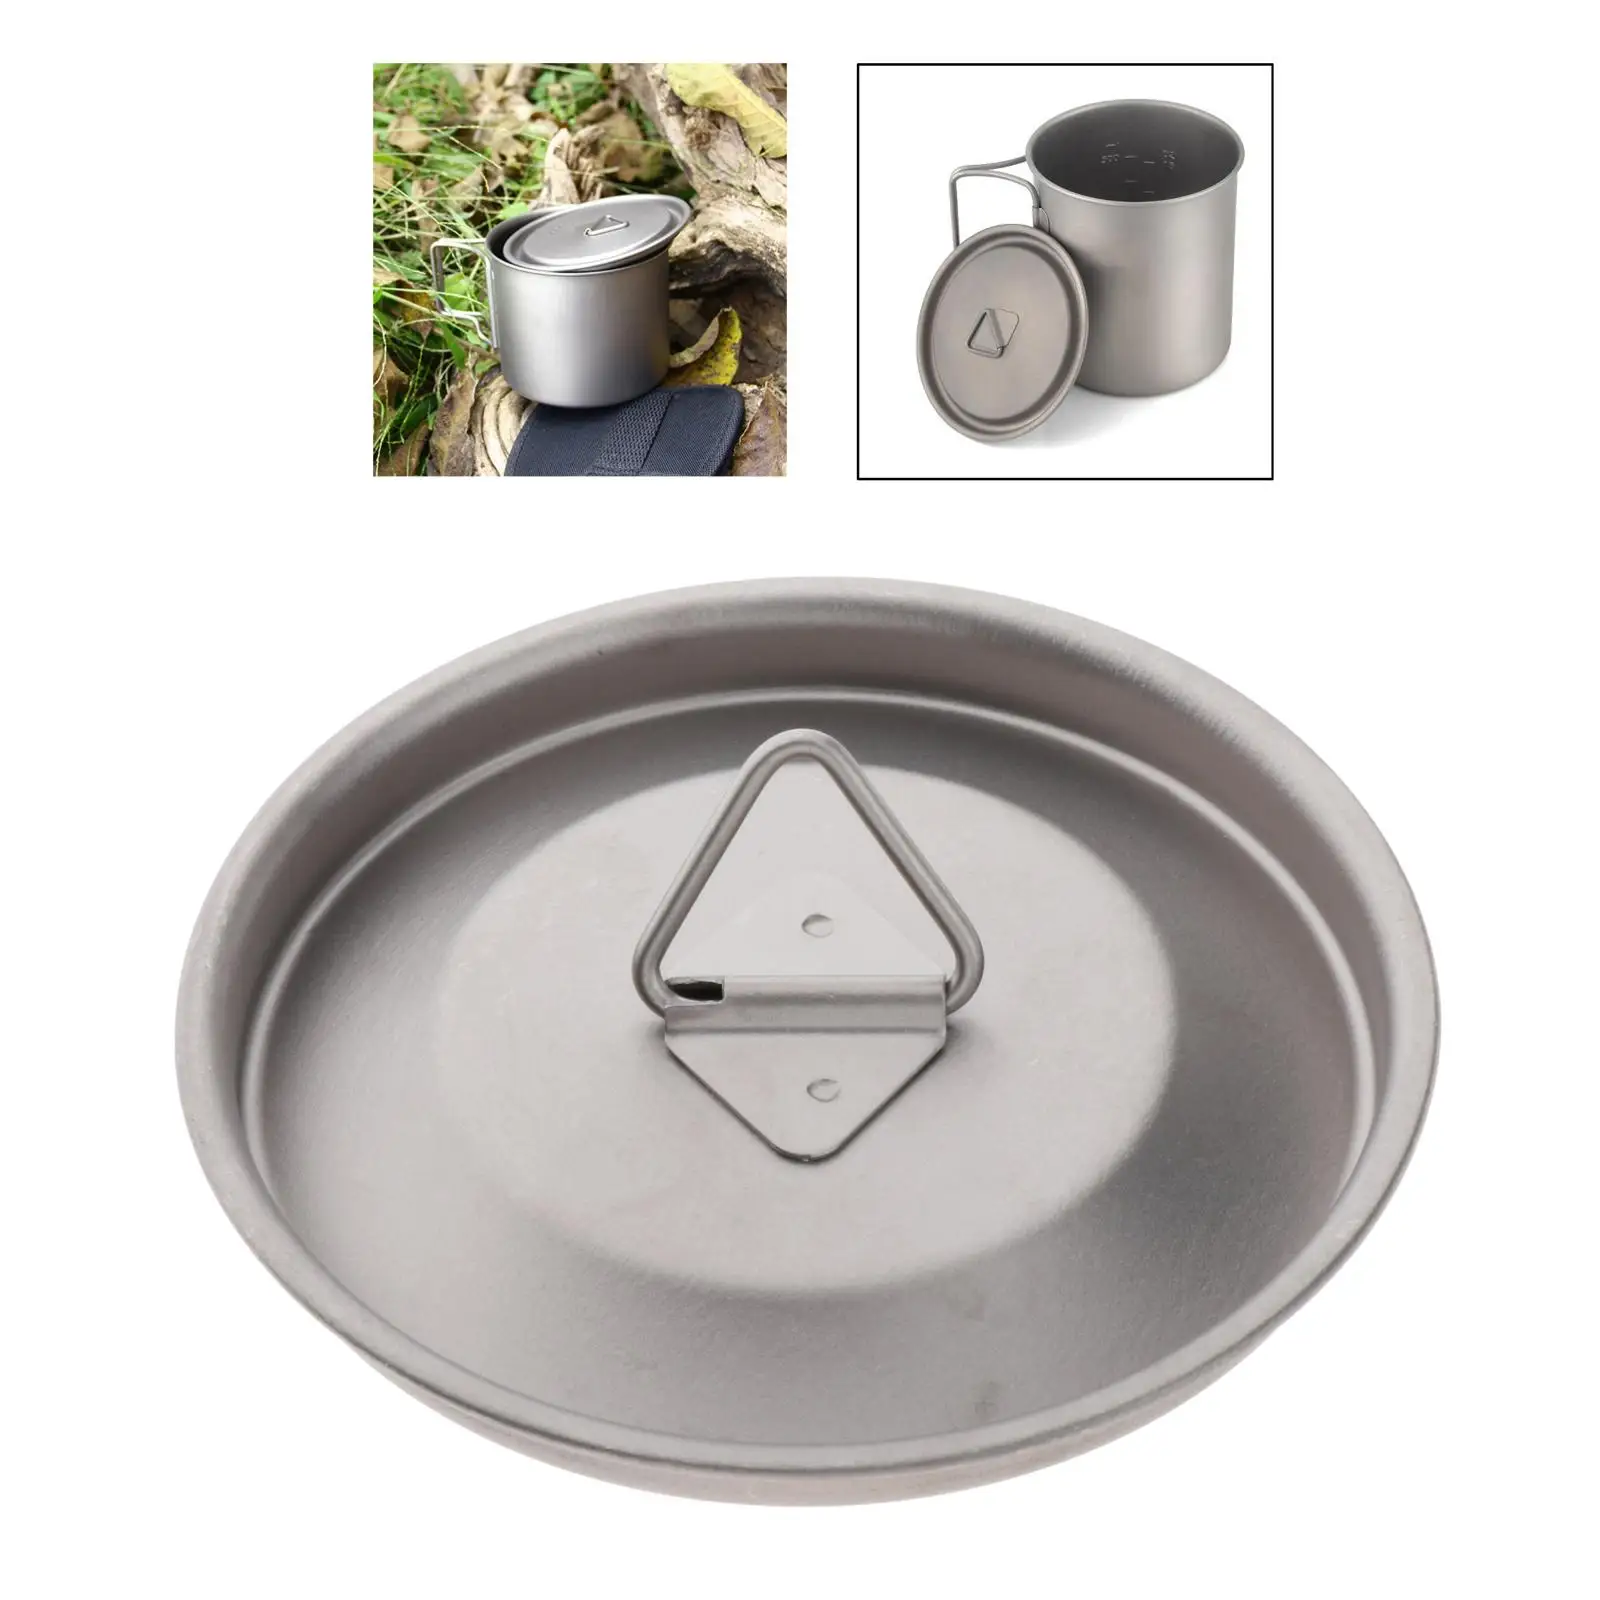 Ultralight Titanium Alloy Mug Lid Picnic Cup Cover with Foldable Handle 85mm 